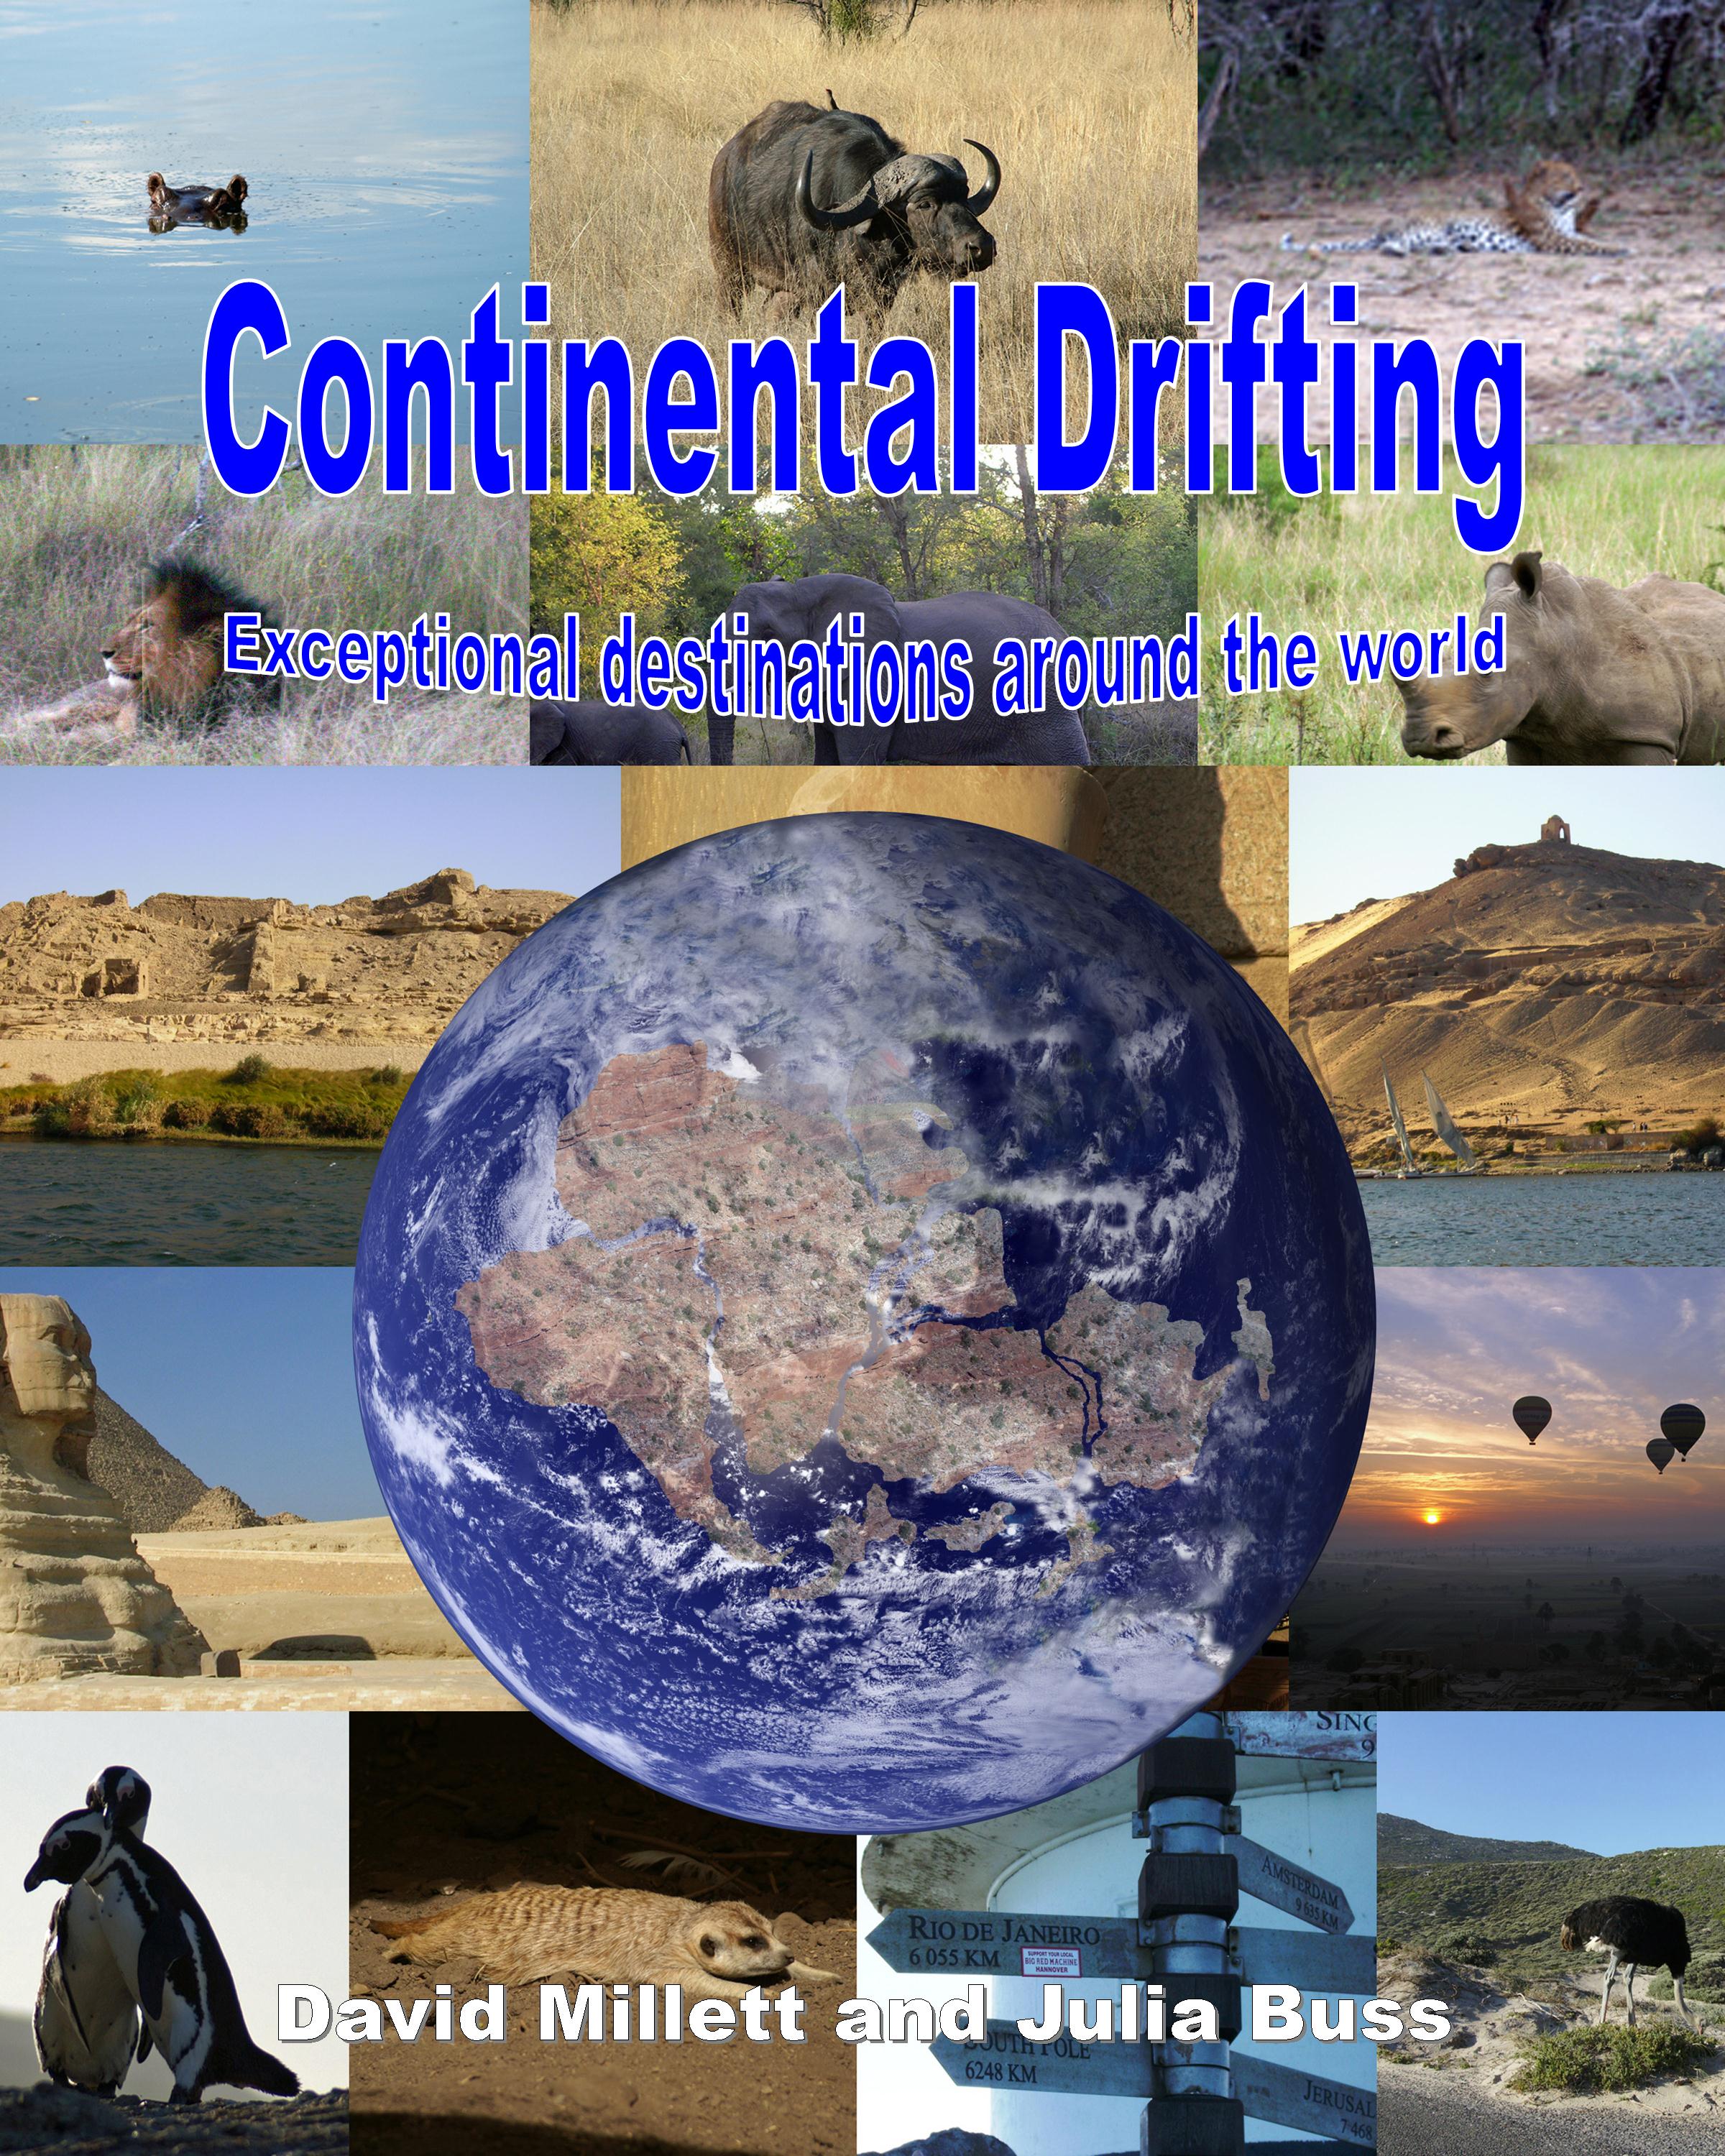 Continental Drifting: Exceptional destinations around the world